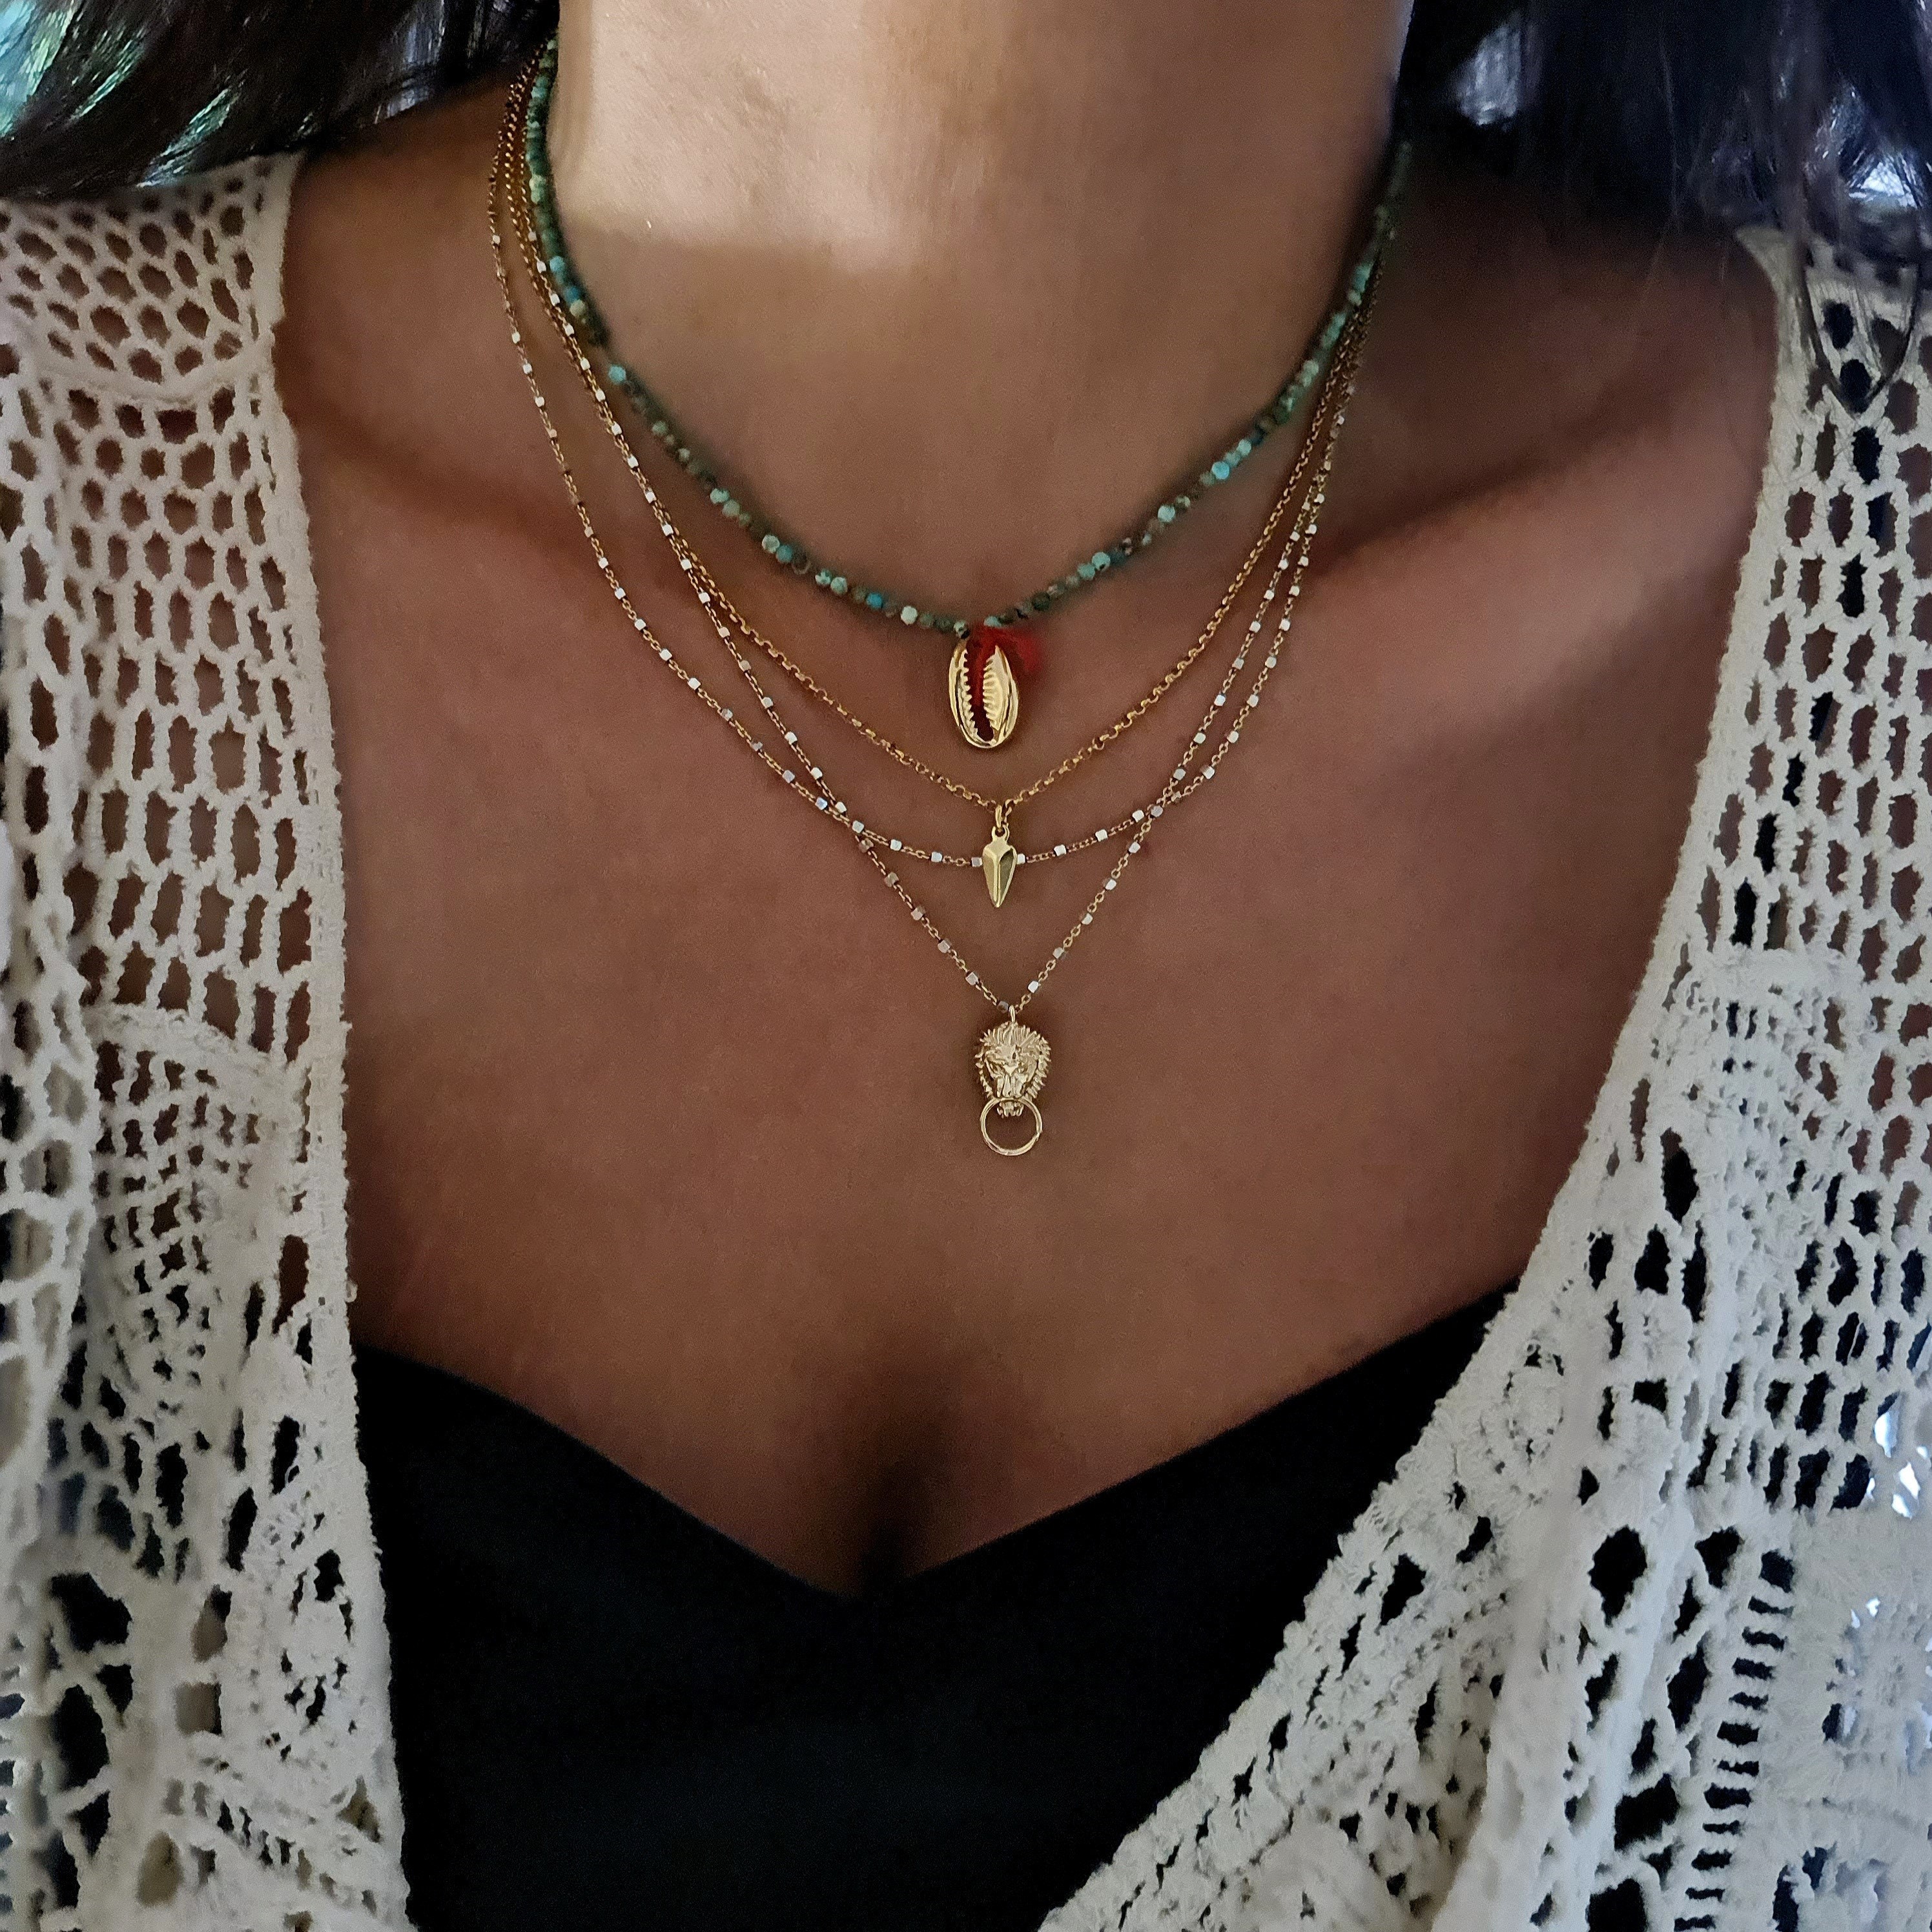 Gortin Layered Necklace Gold Boho Pendant Necklaces Beads Chain Short  Necklace Jewelry for Women and Girls : Amazon.in: Jewellery